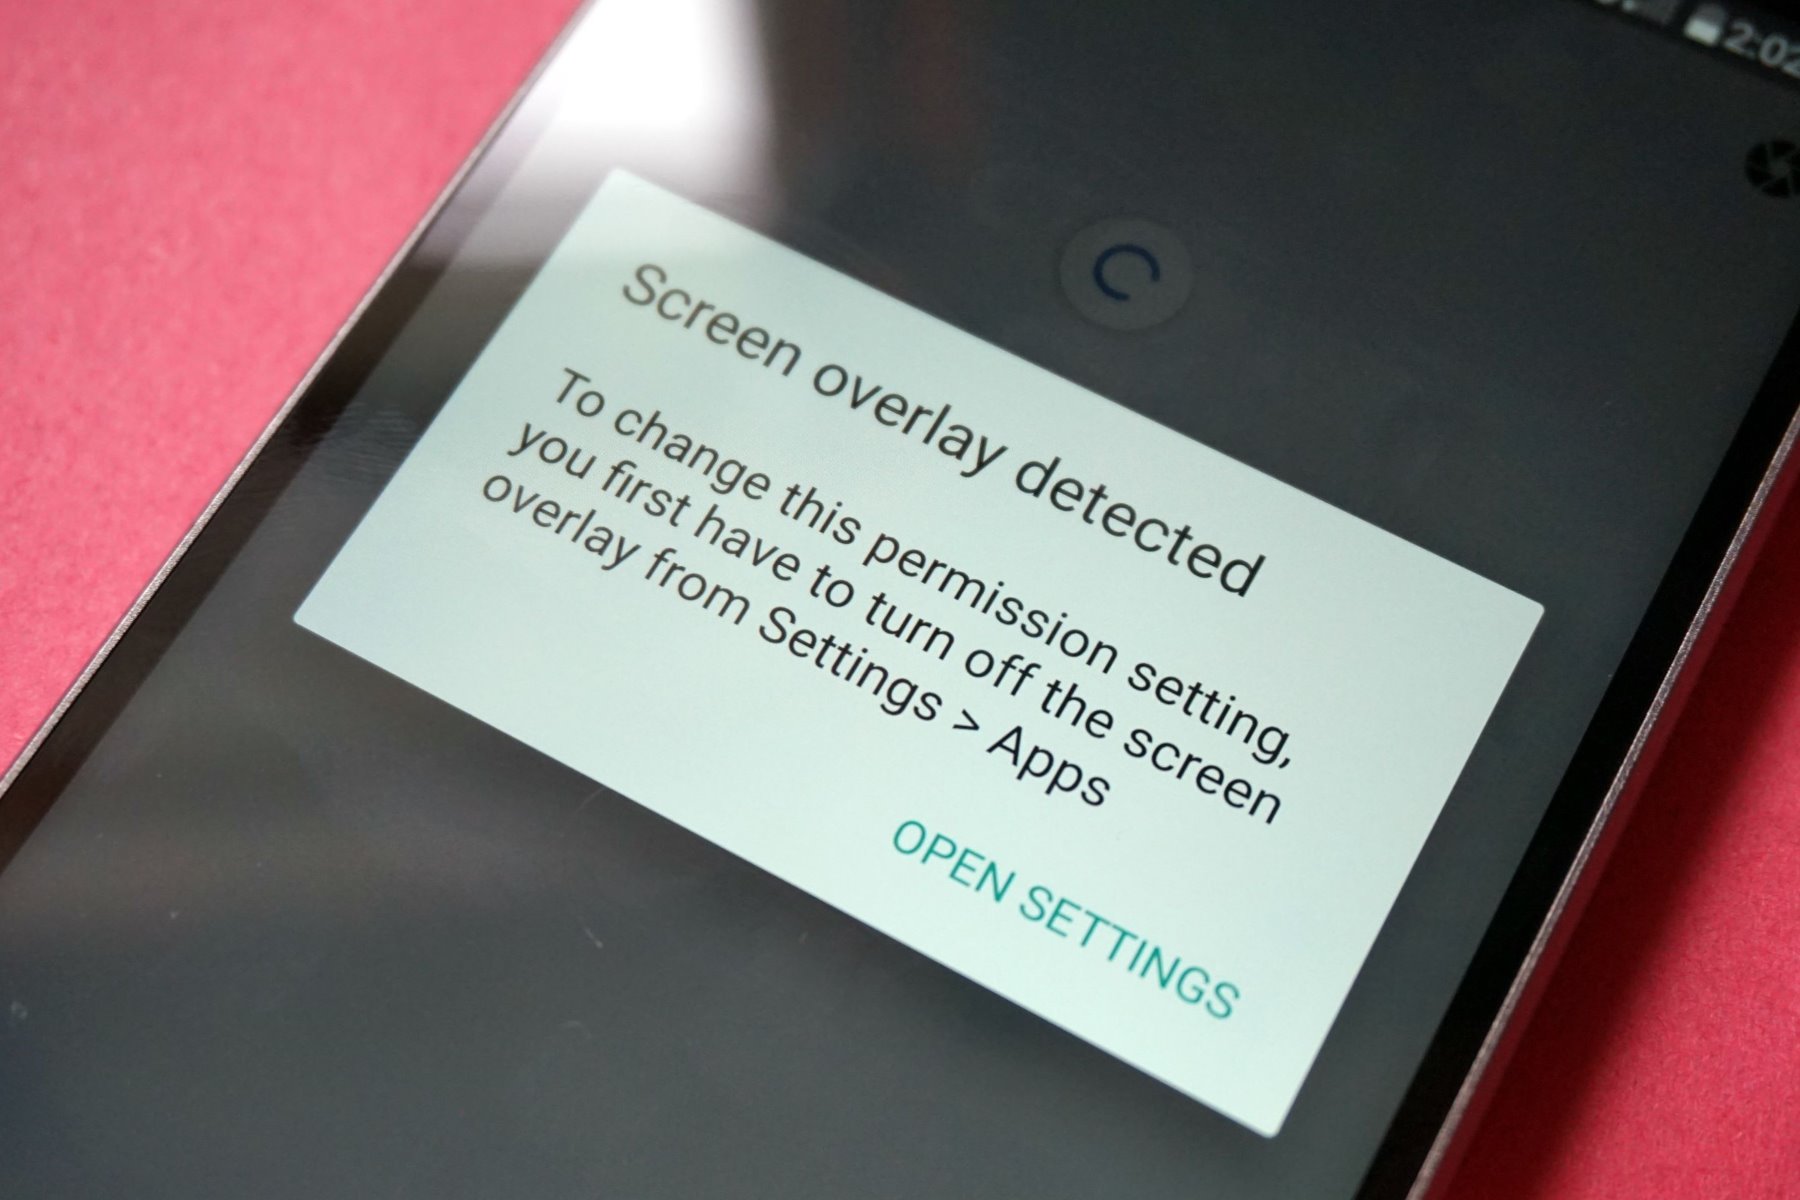 Sony Xperia Screen Overlay Issue: Causes And Solutions